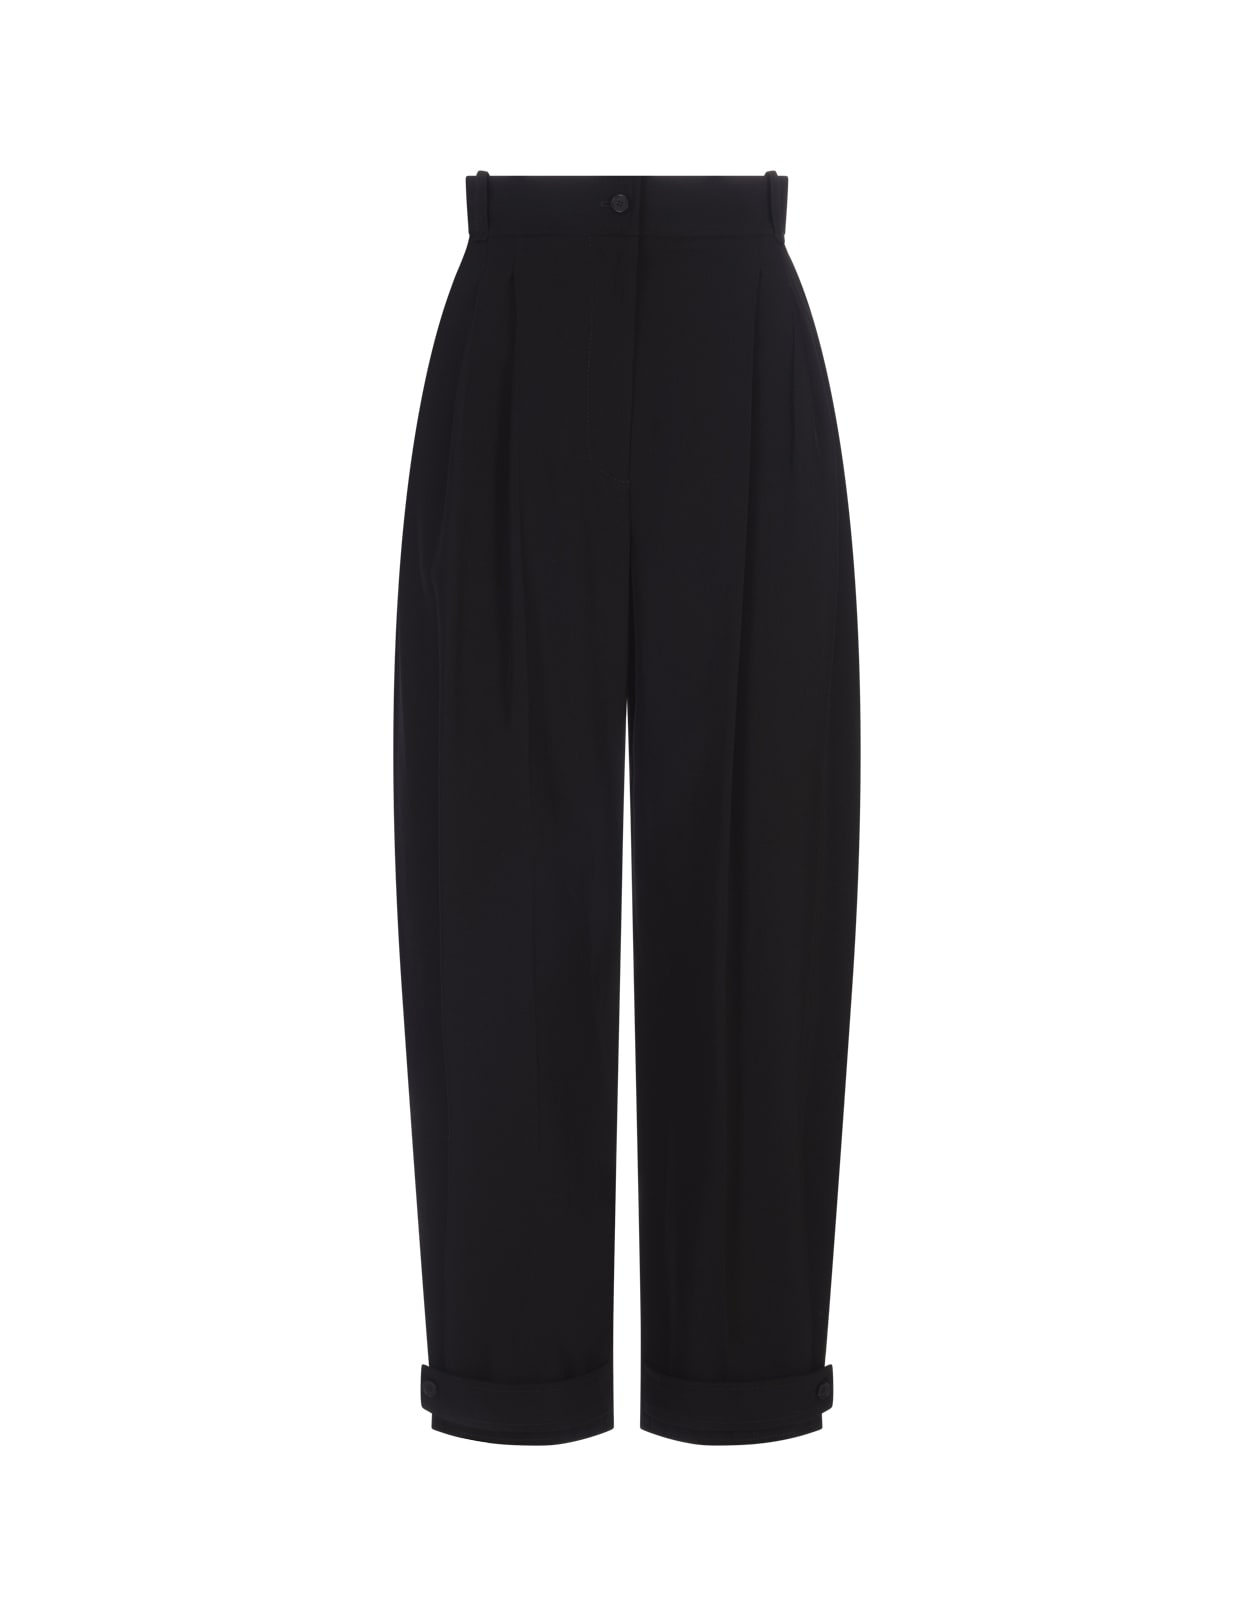 ALEXANDER MCQUEEN BLACK MILITARY TROUSERS